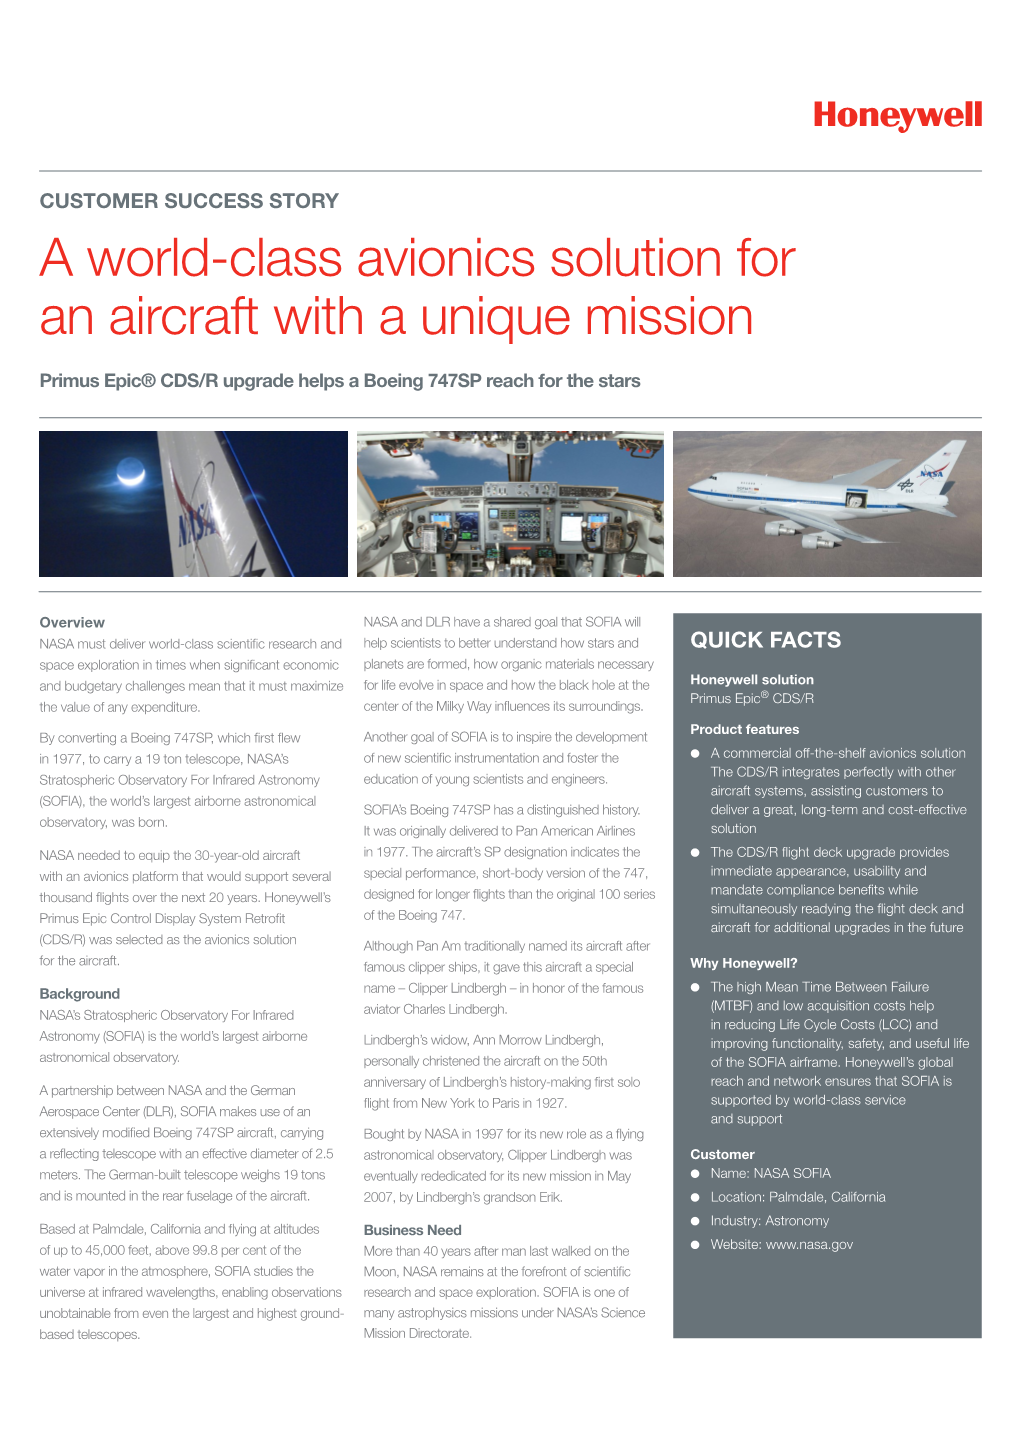 A World-Class Avionics Solution for an Aircraft with a Unique Mission